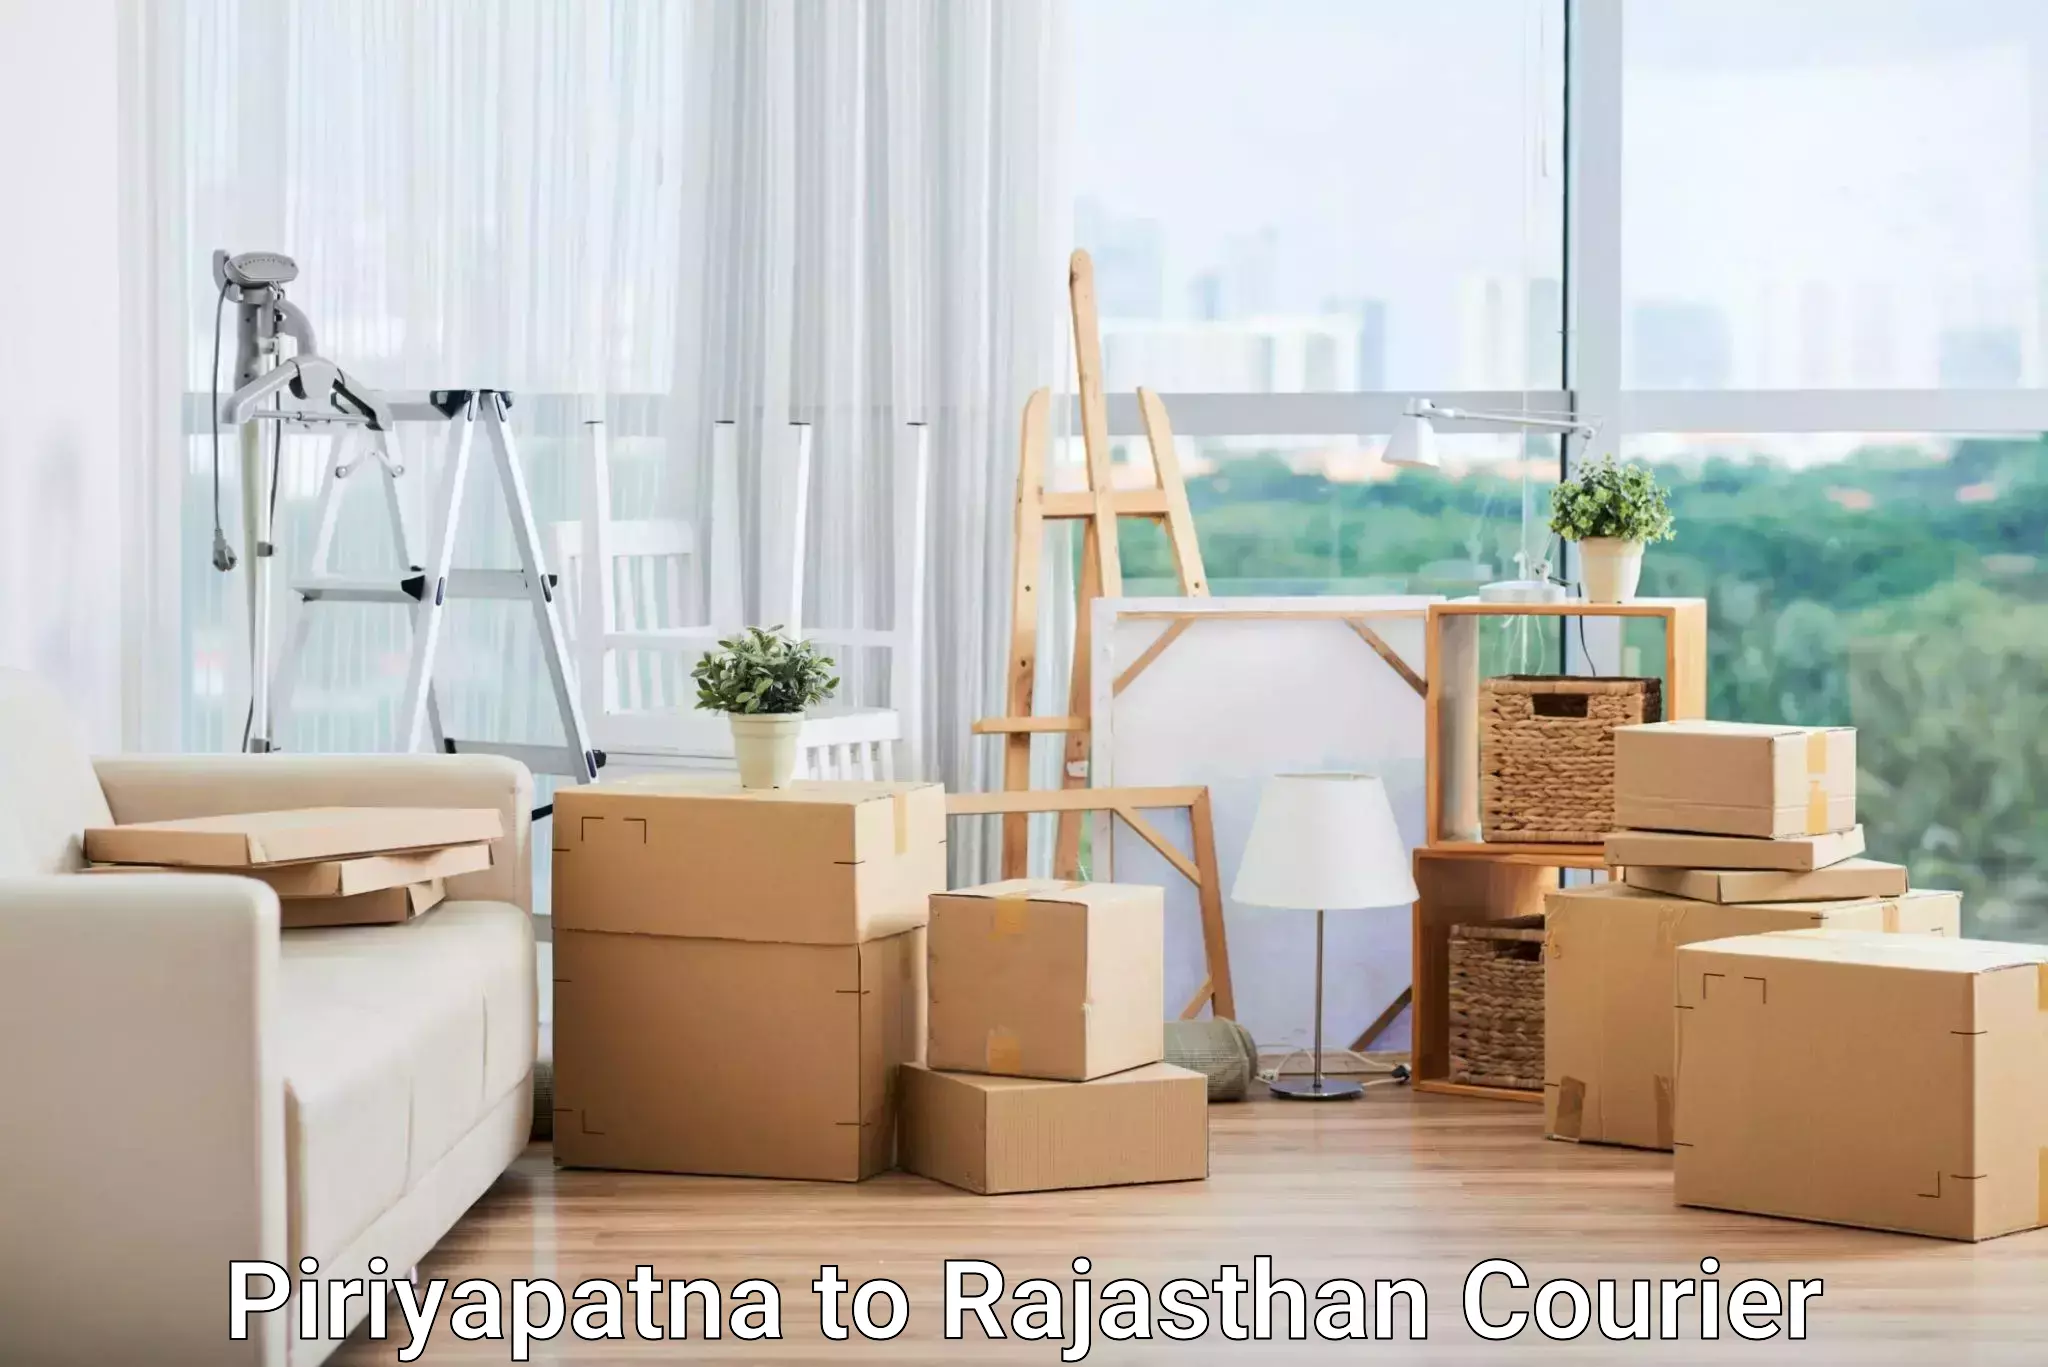 Courier services in Piriyapatna to Weir